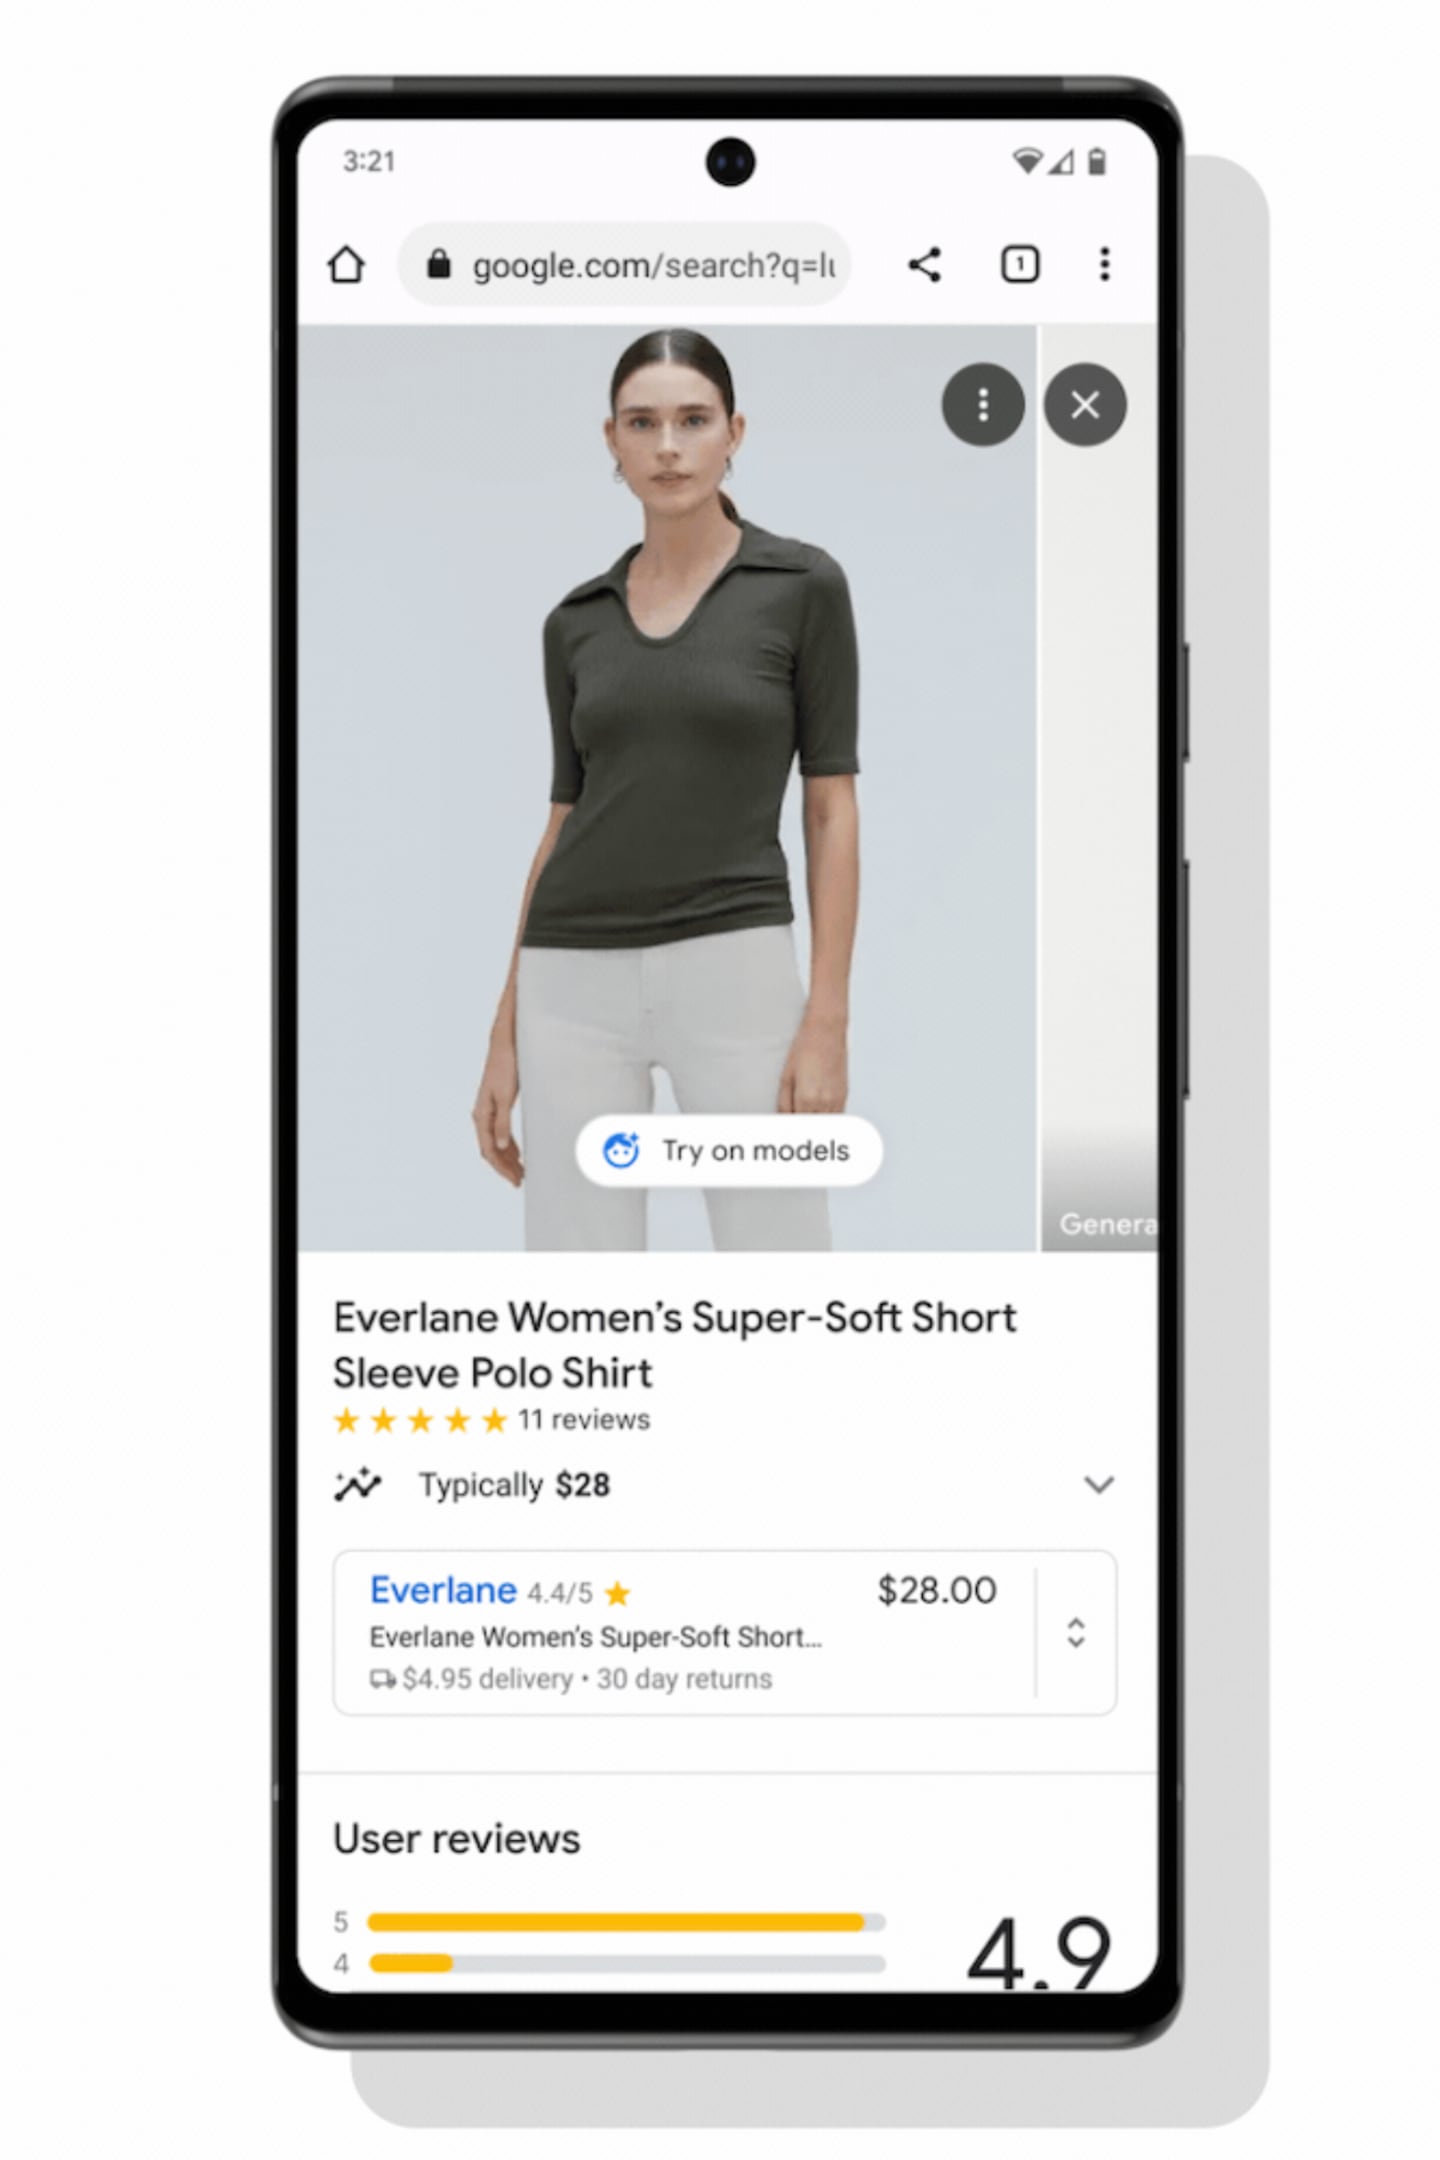 An image of the interface for Google's virtual try-on showing a model in a green short-sleeve polo shirt from Everlane.